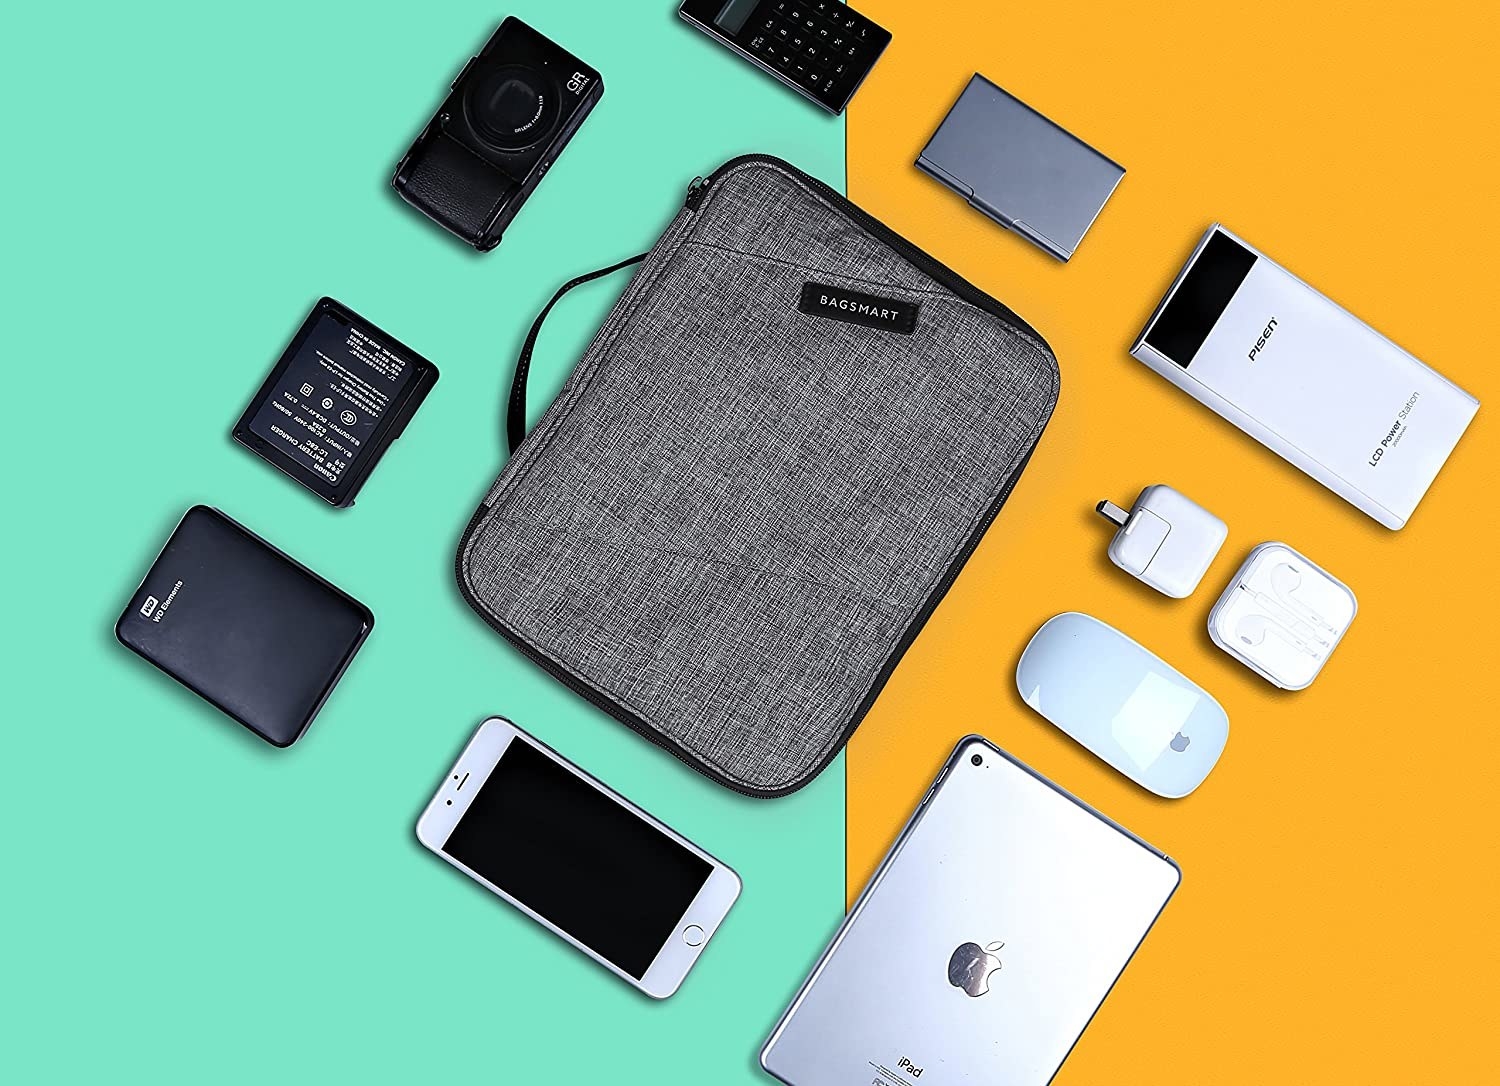 A small rectangular fabric case surrounded by devices and tech accessories